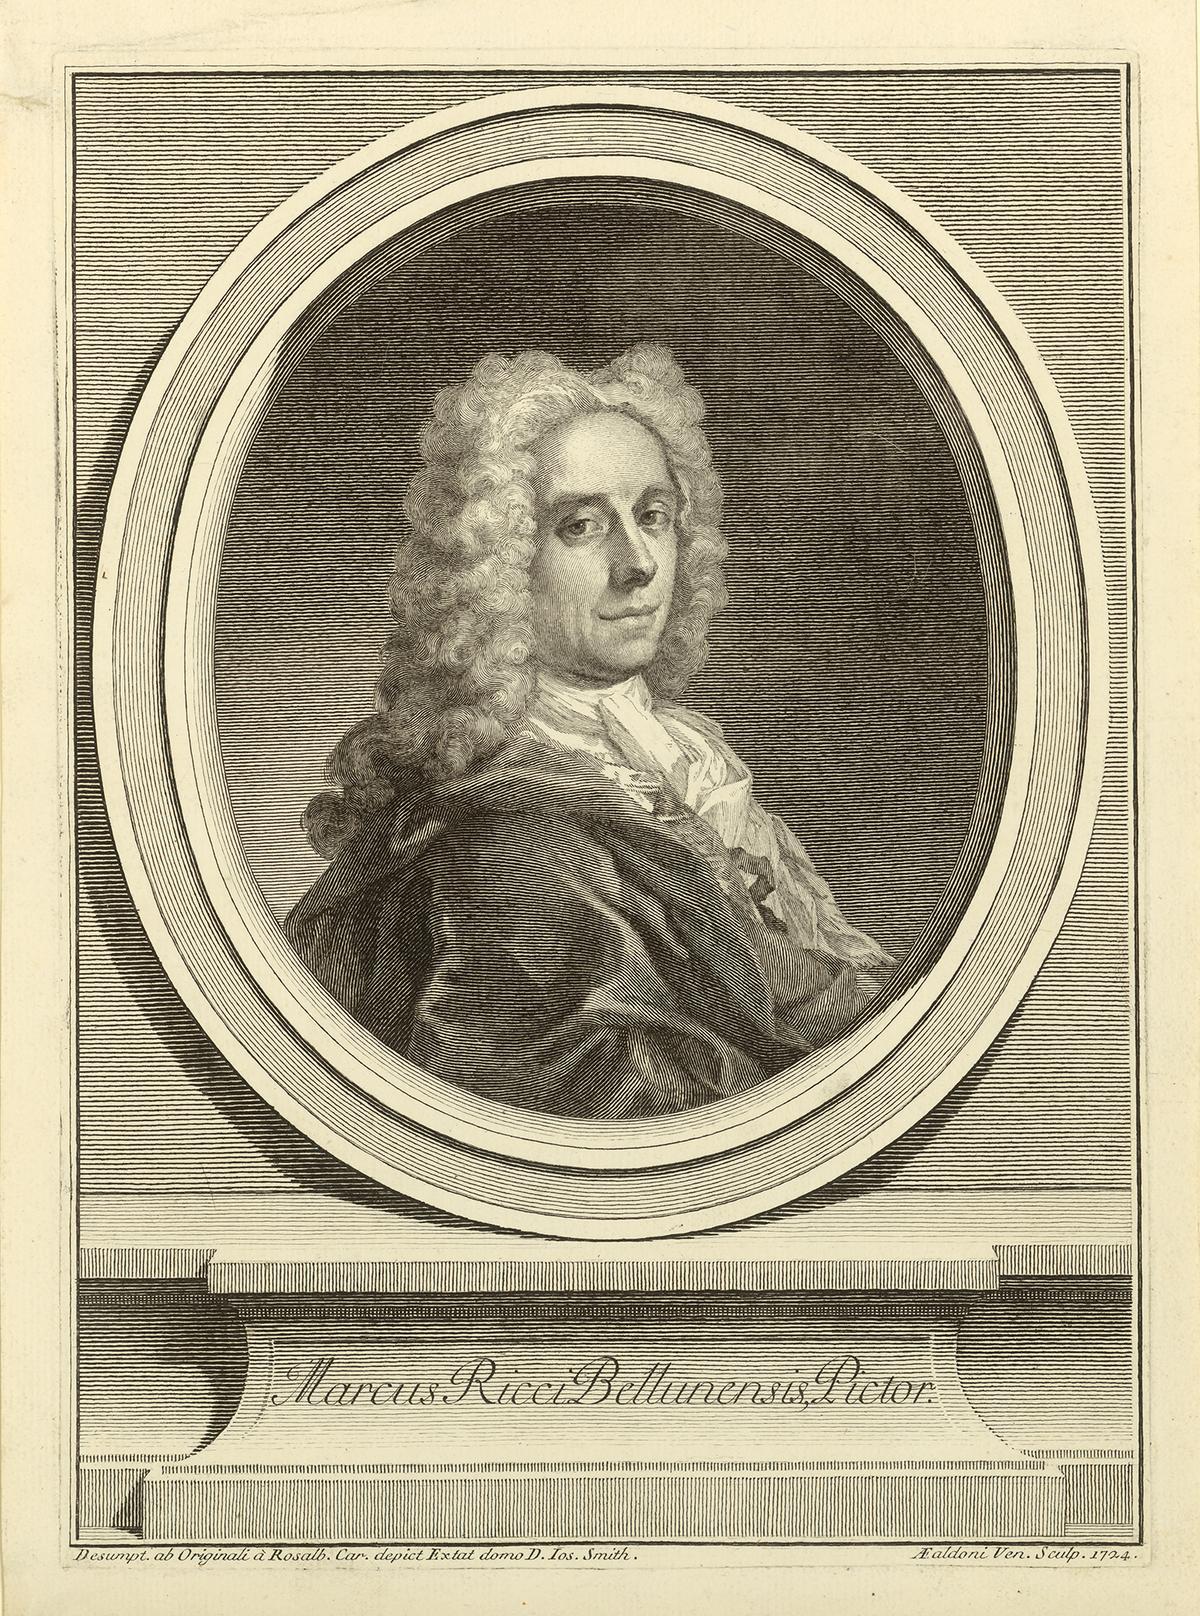 Portrait of Marco Ricci, 1720, etched by Giovanni Antonio Faldoni after Rosalba Carriera. Engraving on paper. ETH Library, Zurich. (Public Domain)